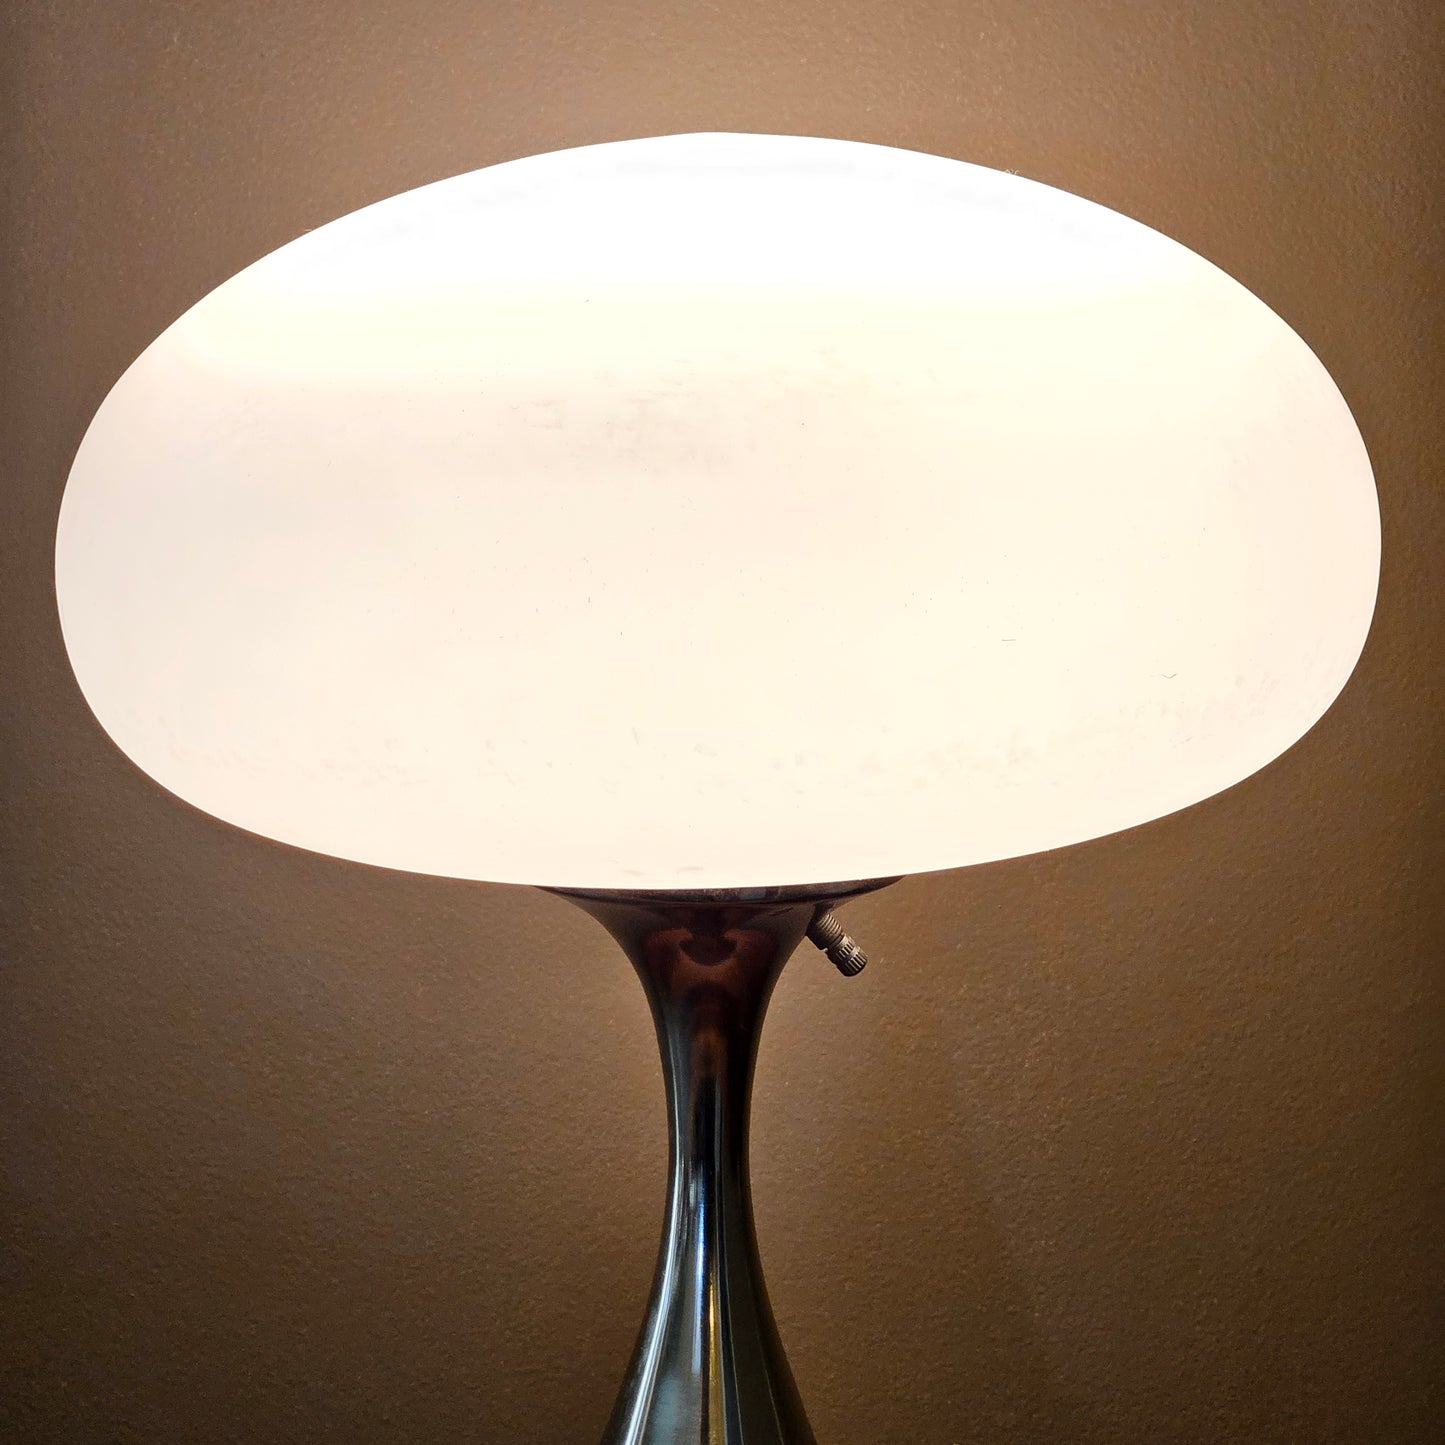 Laurel Style Stemlite Designline Silver Table Lamp with Frosted Glass Mushroom Shade